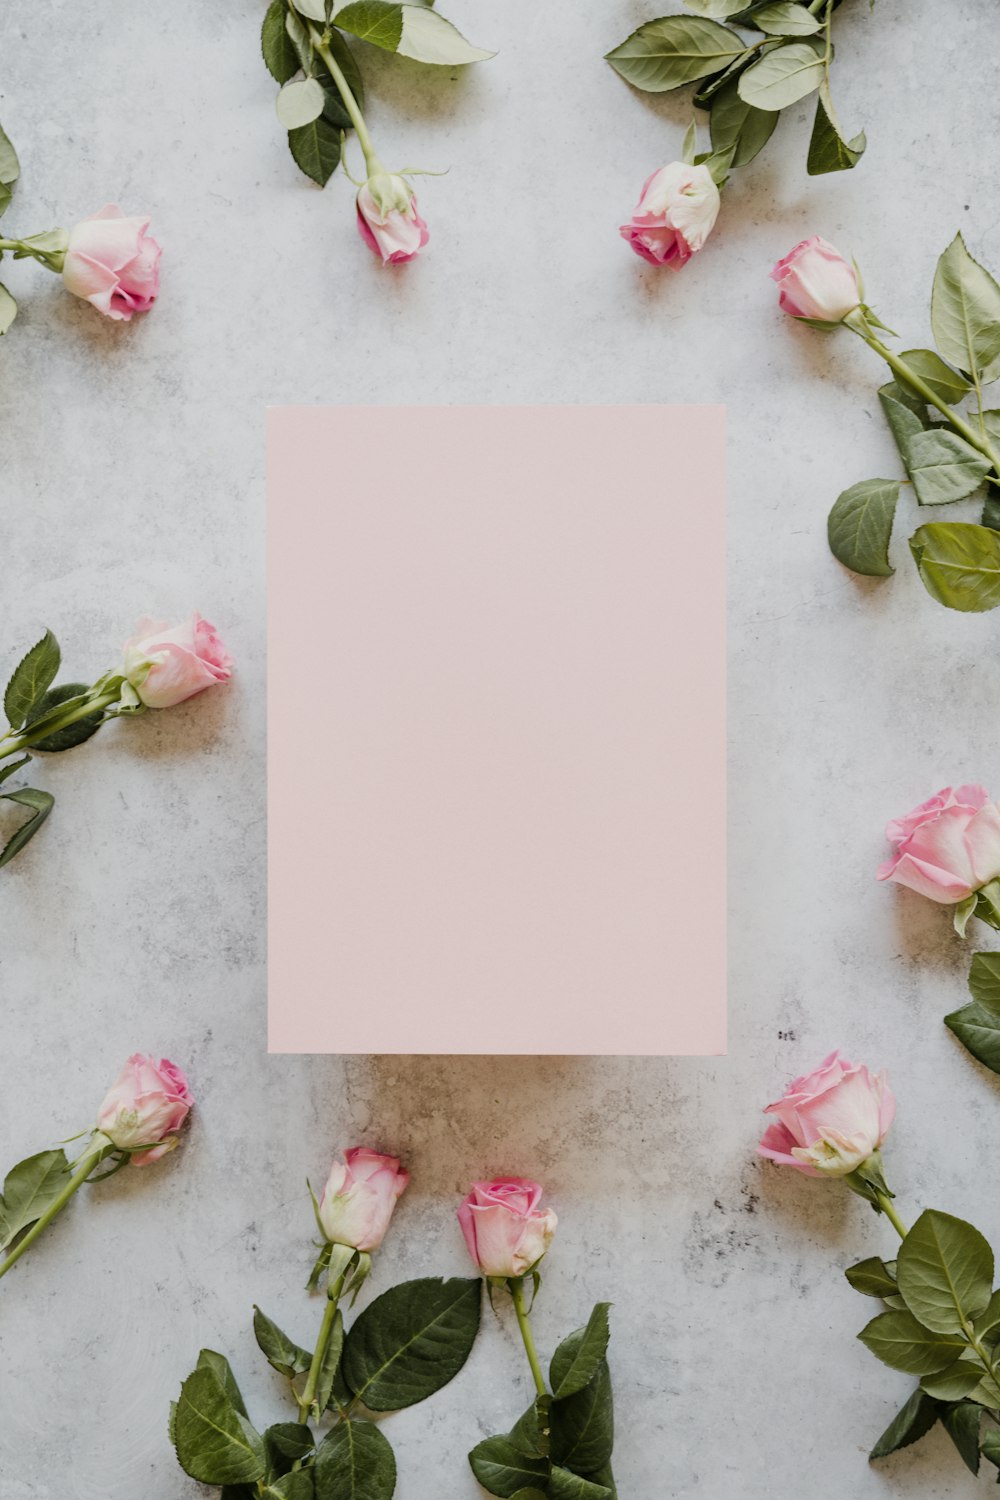 a sheet of paper surrounded by pink roses